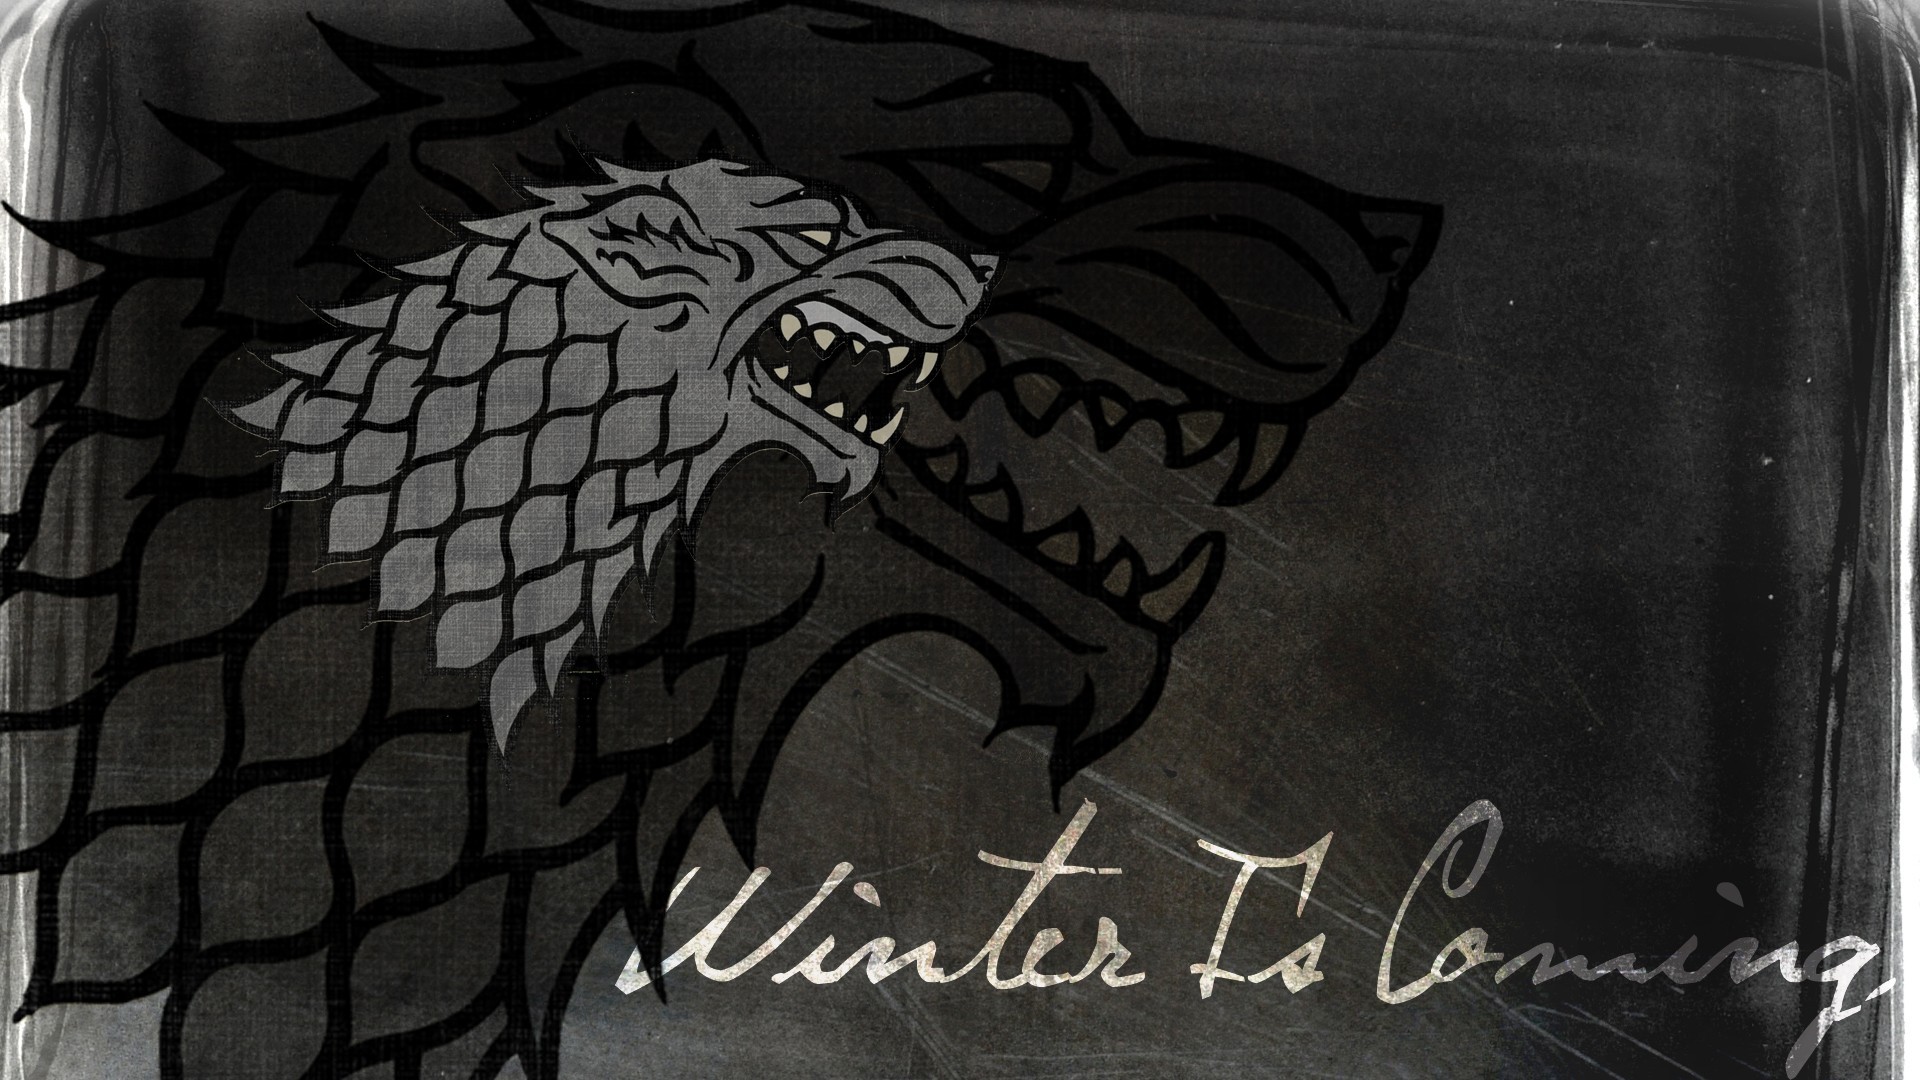 General 1920x1080 Game of Thrones Winter Is Coming House Stark TV series